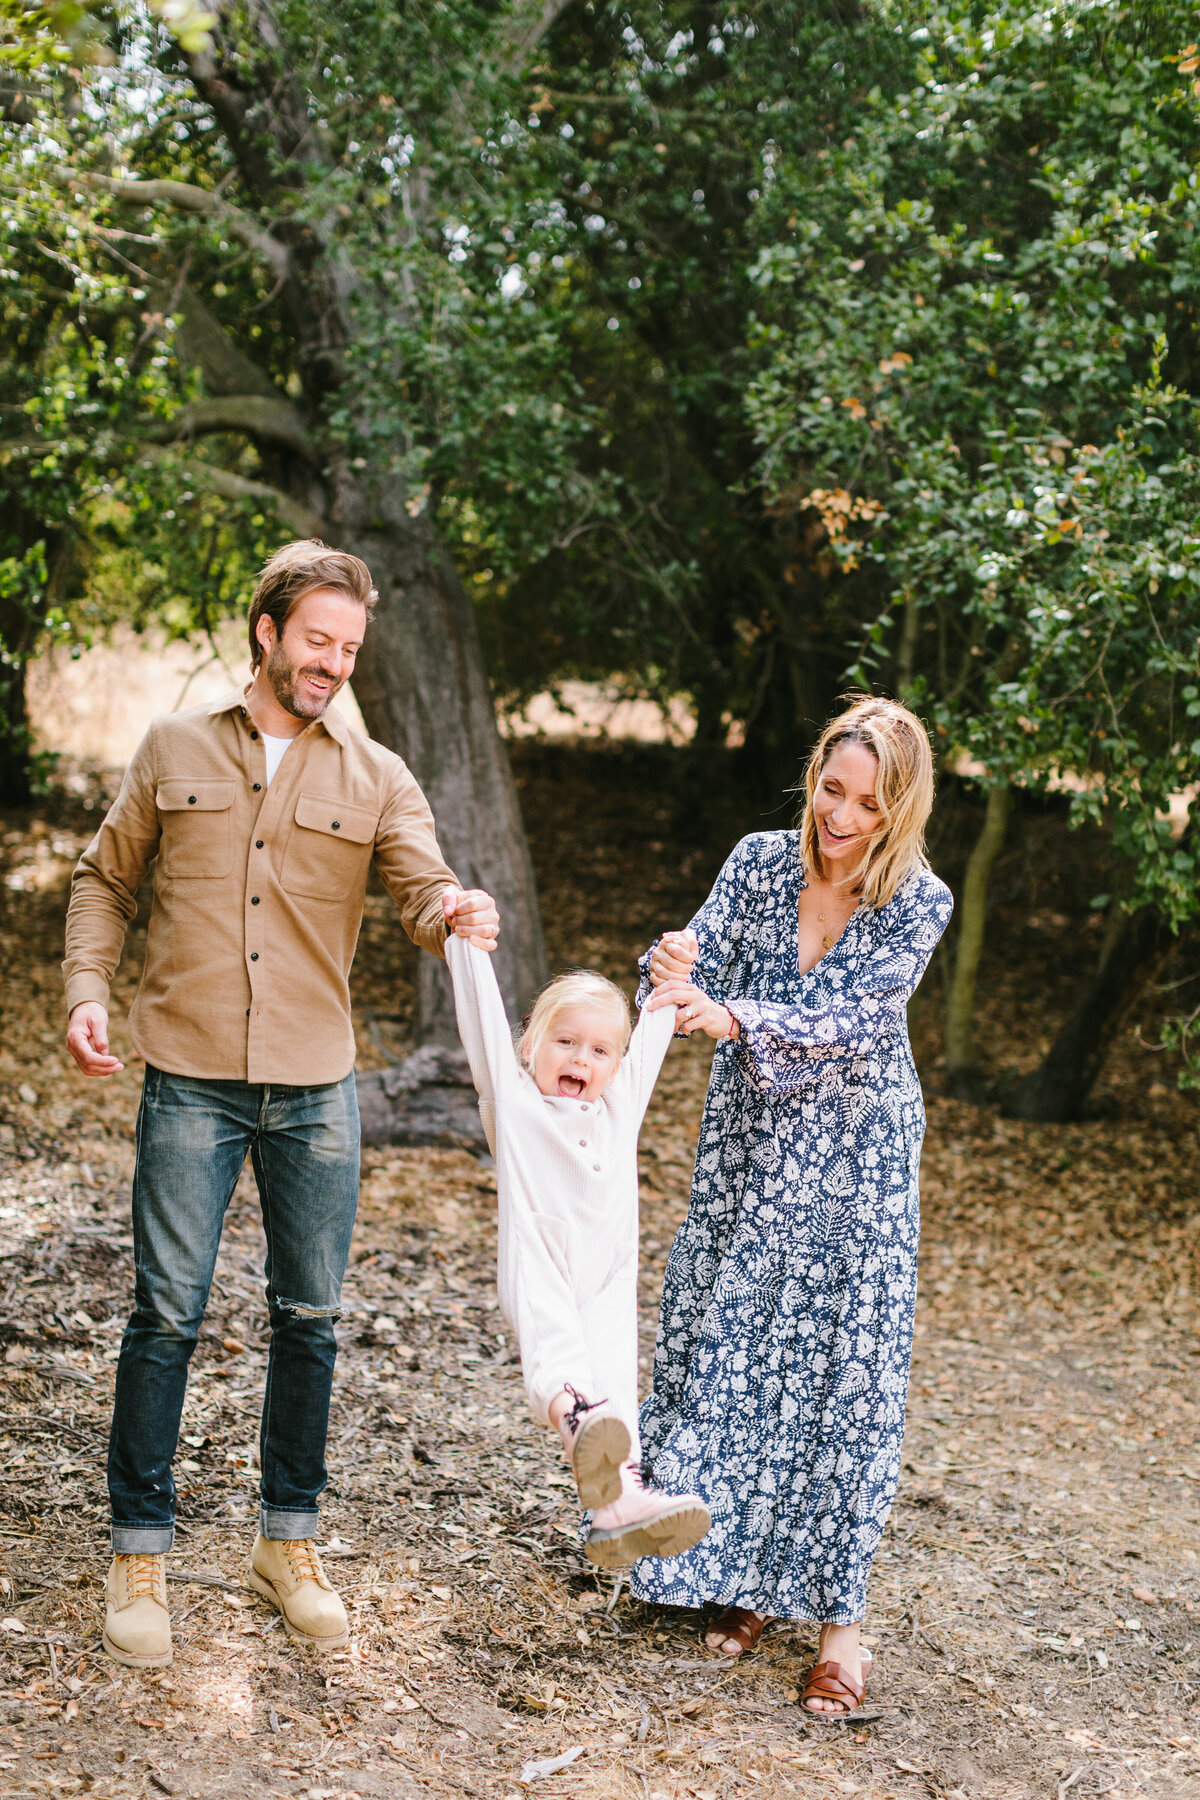 Best California and Texas Family Photographer-Jodee Debes Photography-253